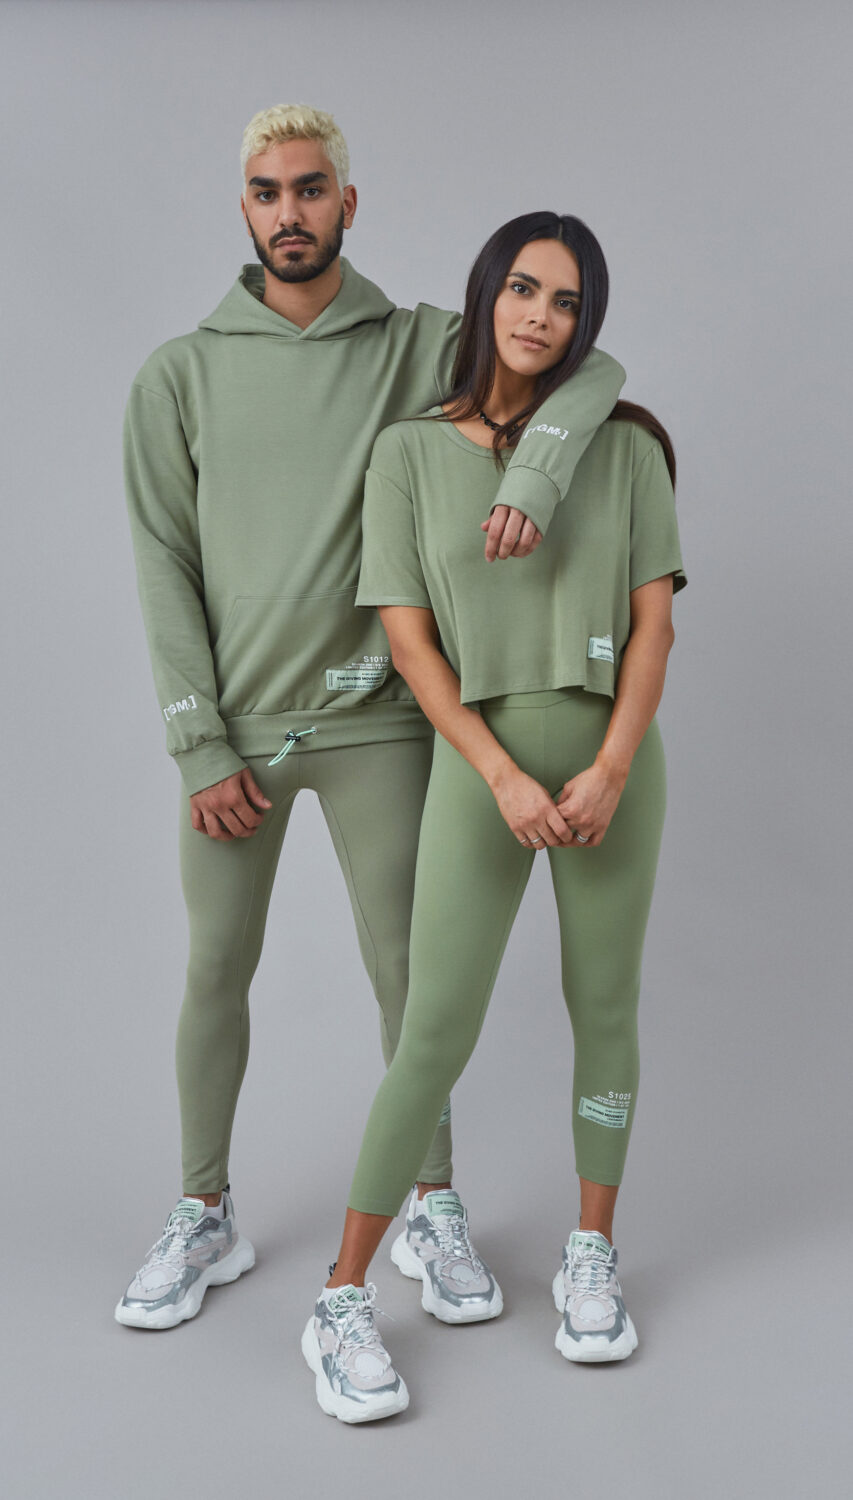 The Giving Movement: UAE athleisure brand drops its Metallic